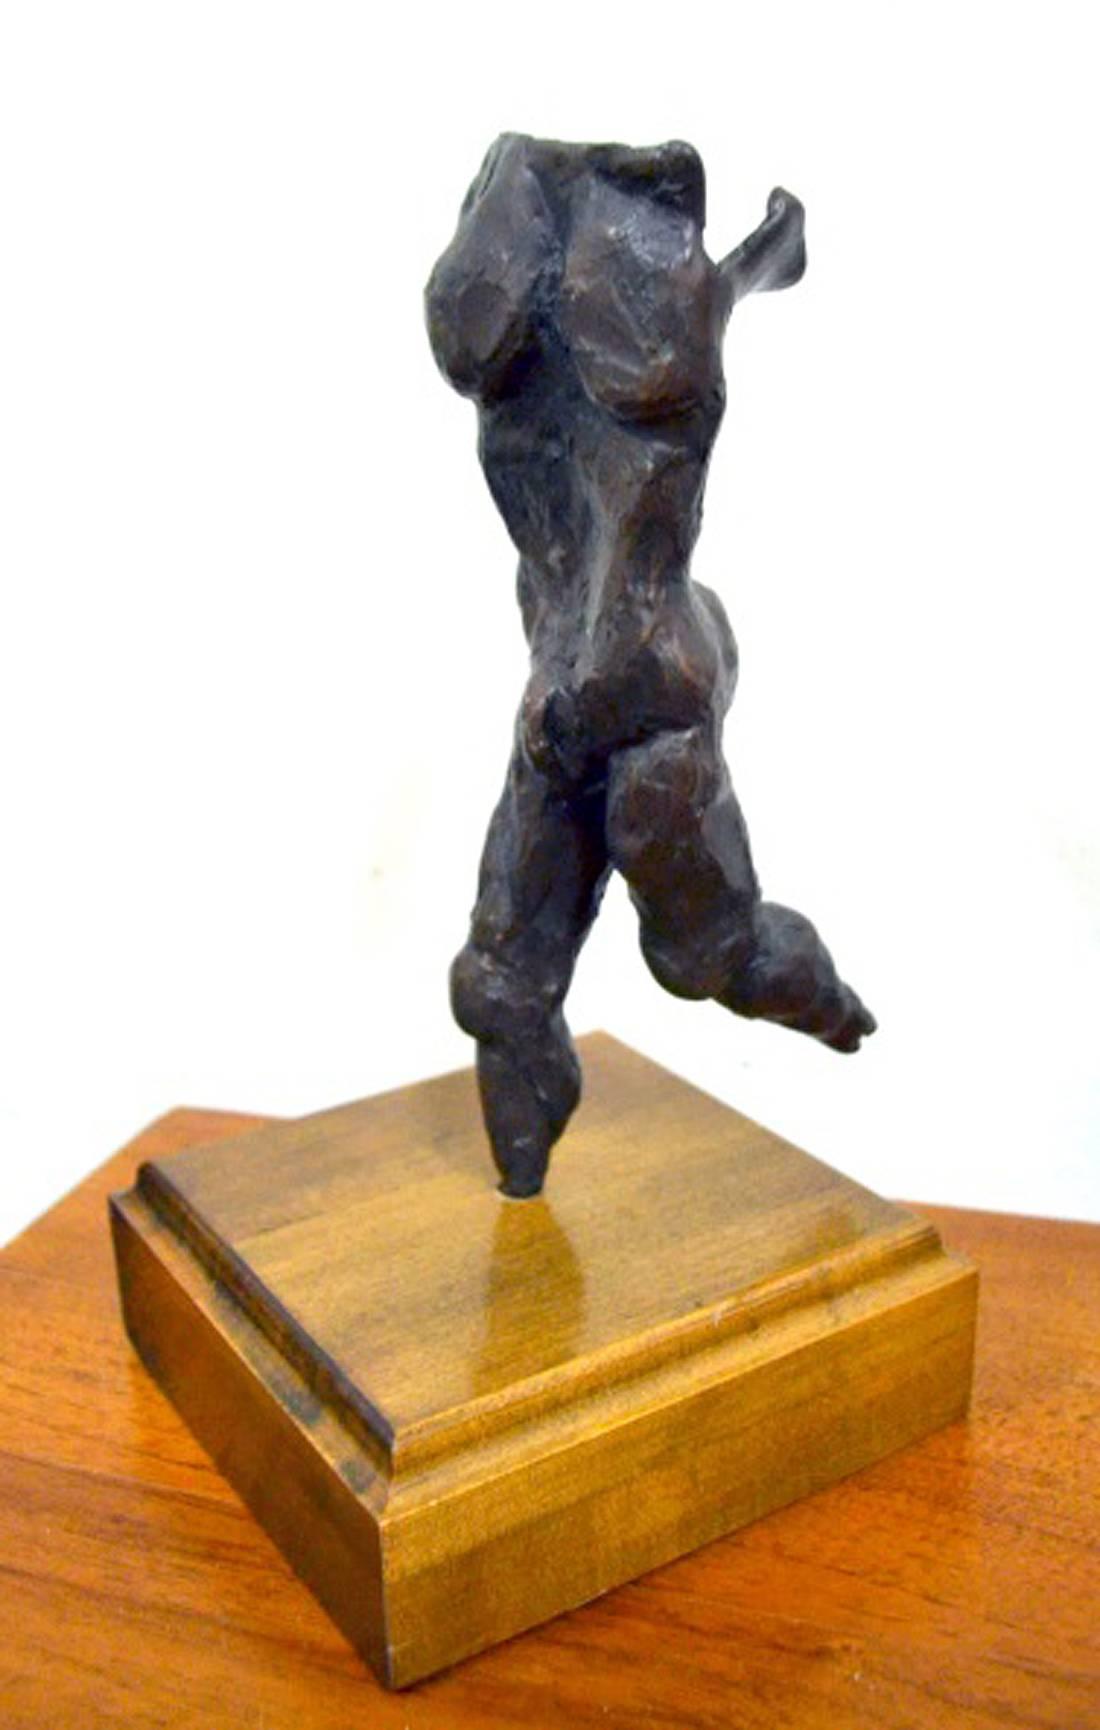 This handsome bronze sculpture is by retired Chicago doctor Harold Kaplan (b. 1912). The sculpture is mounted to a wood base. It is a beautiful piece for display on a table or perhaps on a mantel.